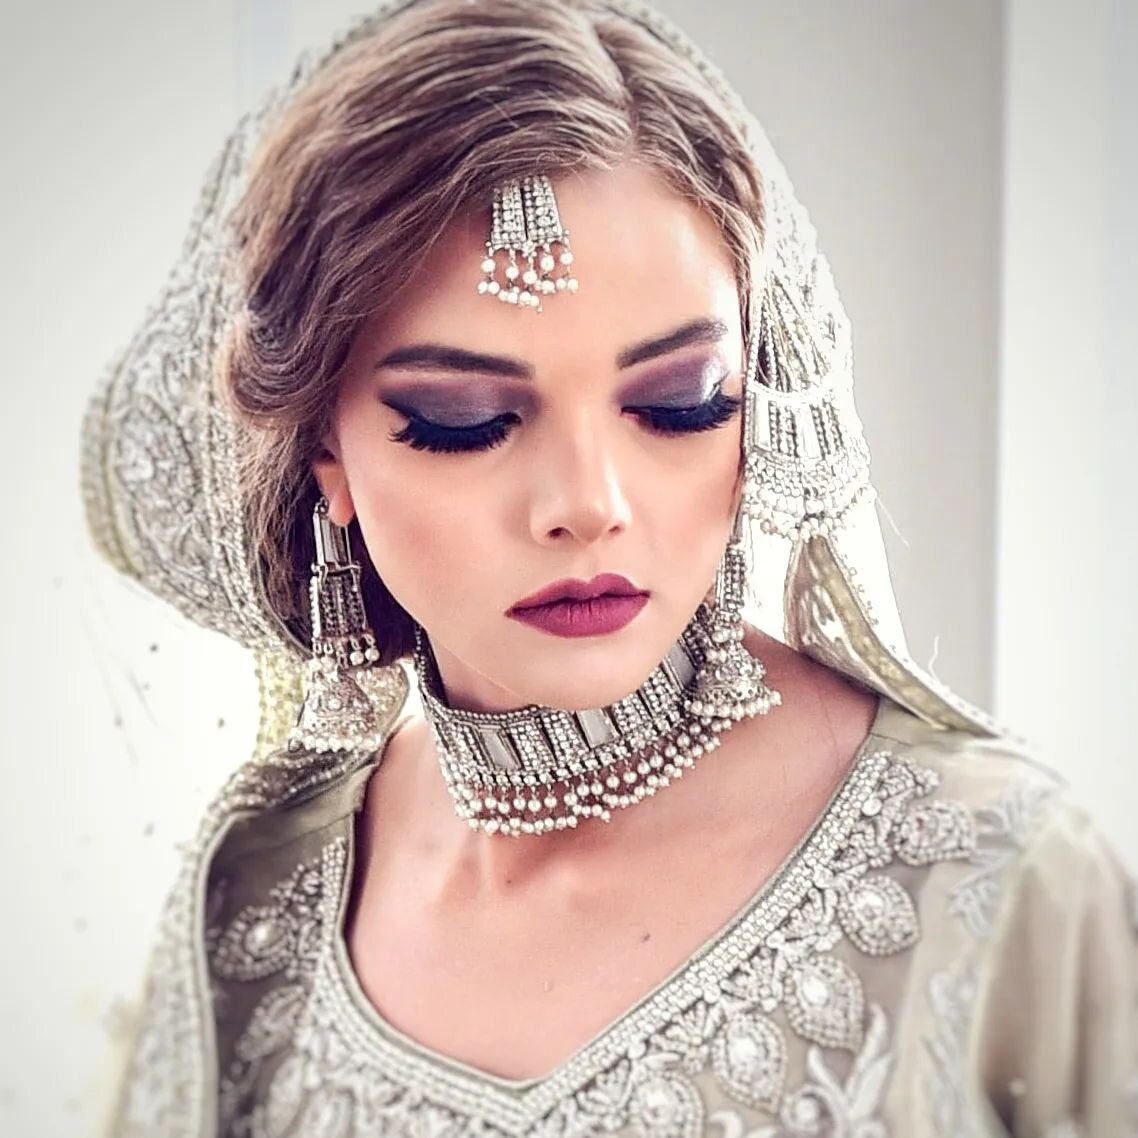 BOOKING BRIDAL AND PARTY HAIR AND MAKEUP FOR 2023! 👰&zwj;♀ call or text 647 365 3855.📱email info@glowgirlbeauty.ca 💄  RECEPTION BRIDAL MAKEUP BY @glowgirlbeauty_mua ❤️ 

🎬  Creative Director @glowgirlbeauty_mua

💄 @glowgirlbeauty_mua 
👗 @bareer